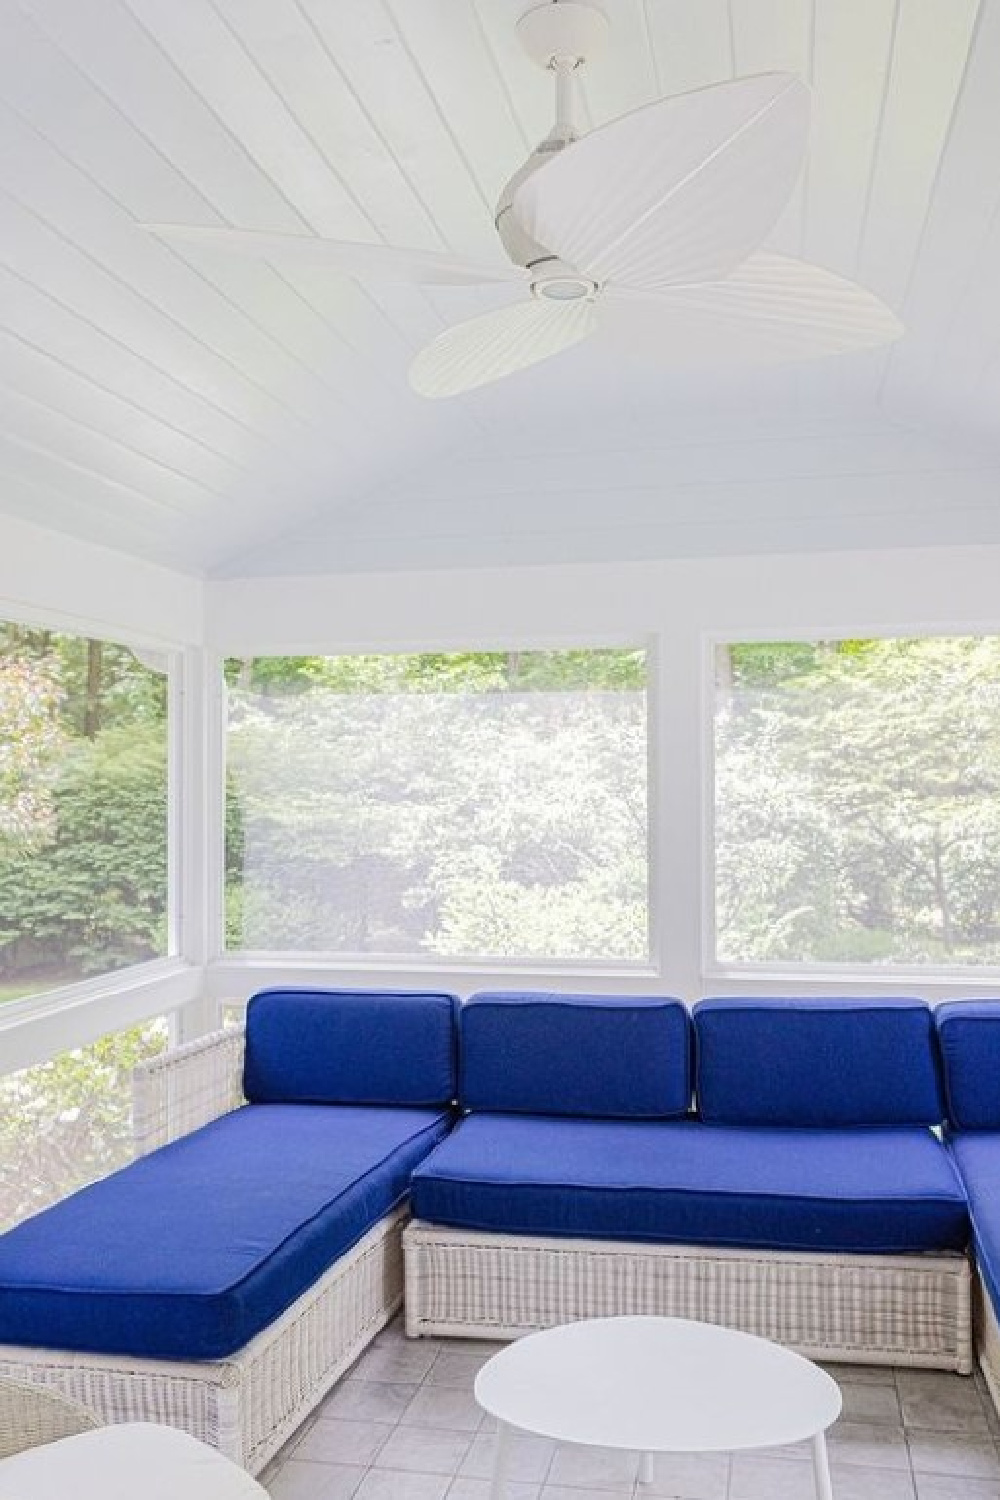 Design: The Odell Group. Sunroom with royal blue upholstery and BM Decorator's White paint color. #decoratorswhite #bmdecoratorswhite